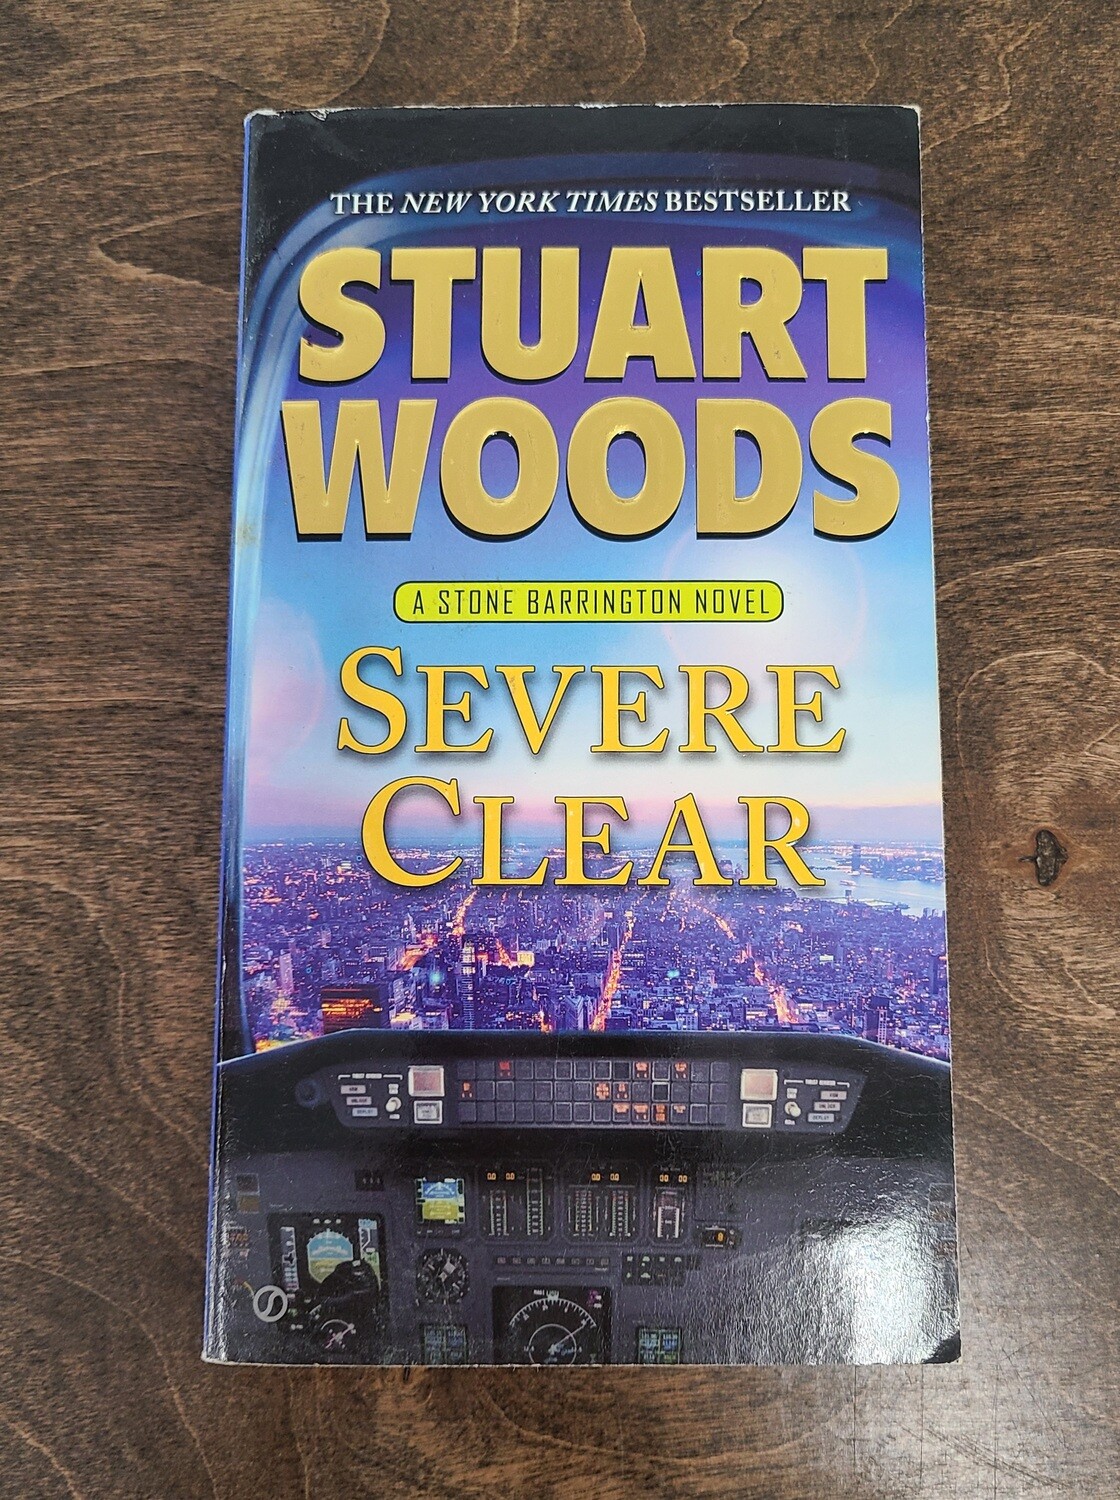 Severe Clear by Stuart Woods